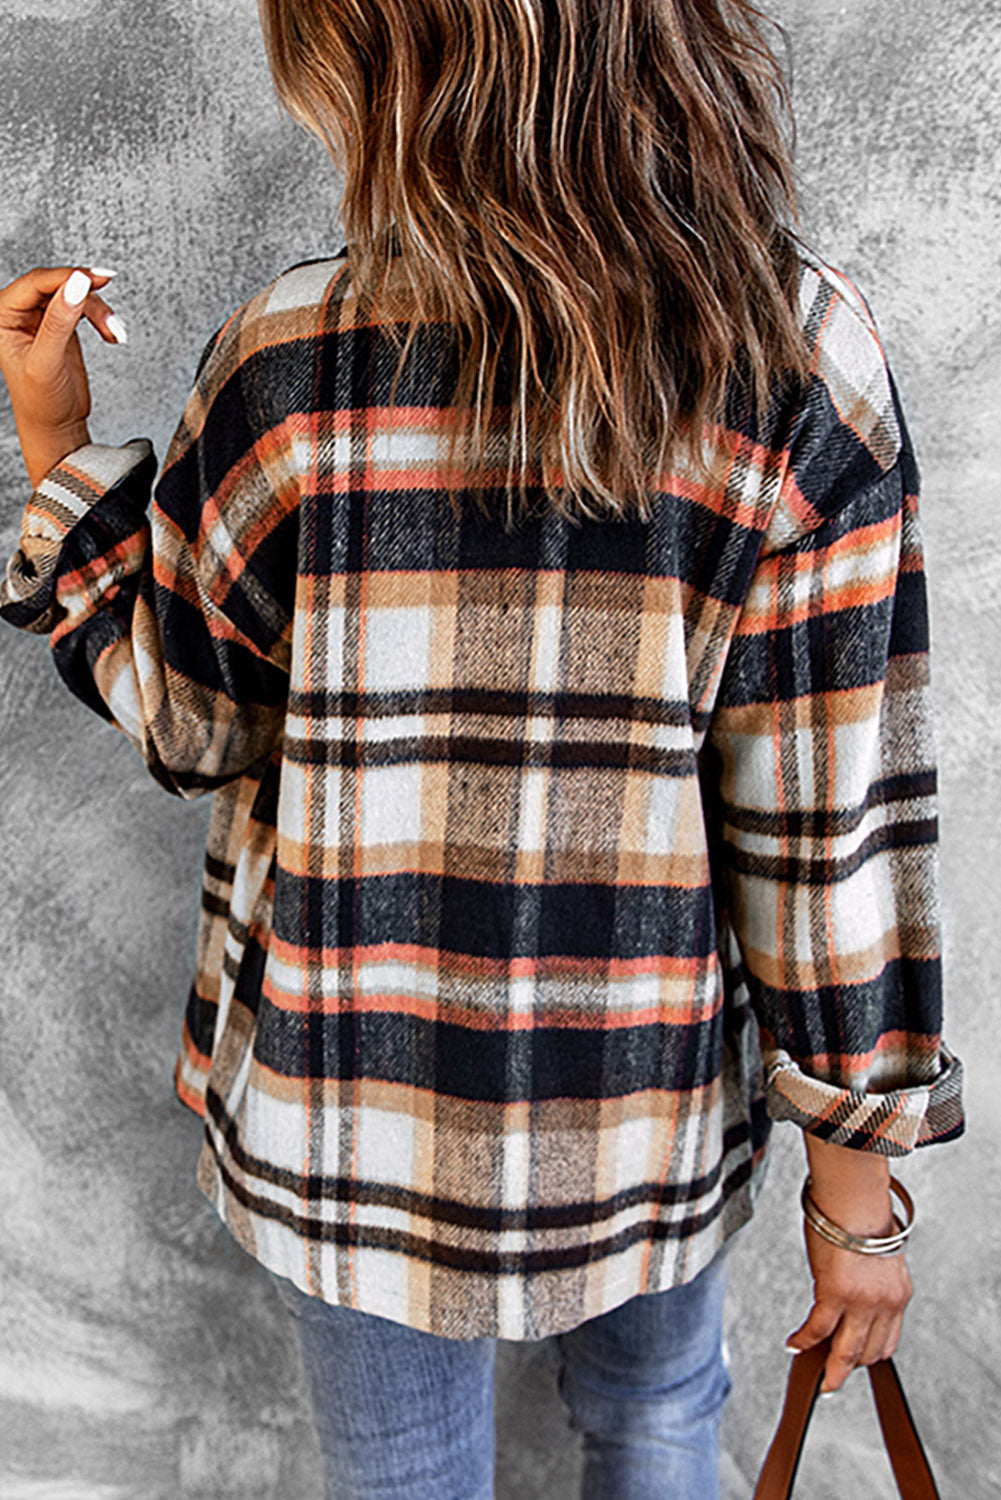 Plaid Button Front Shirt Jacket with Breast Pockets - Online Only *